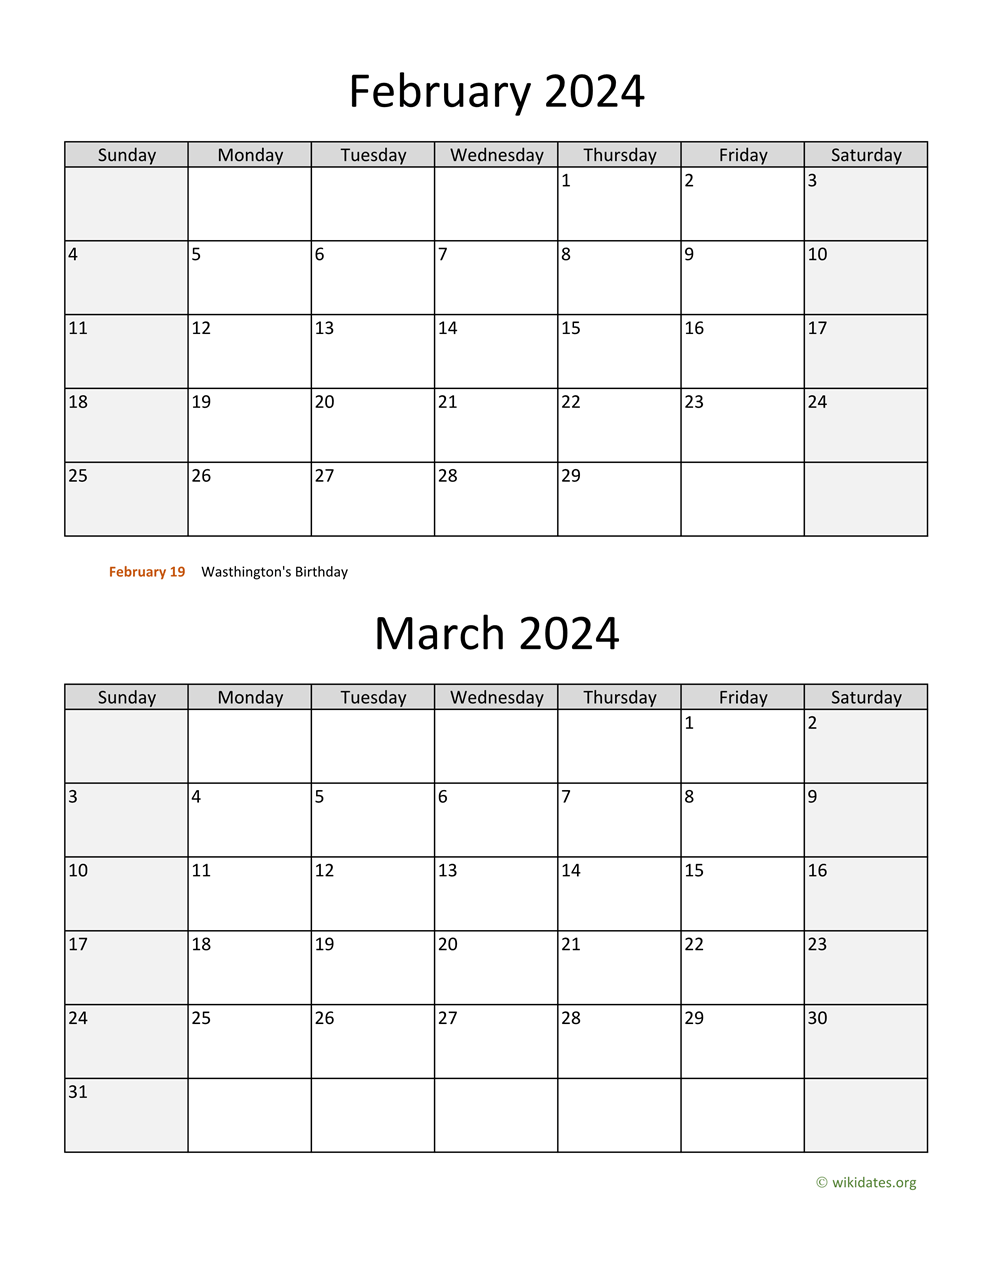 February And March 2024 Calendar | Wikidates for February March 2024 Calendar Printable